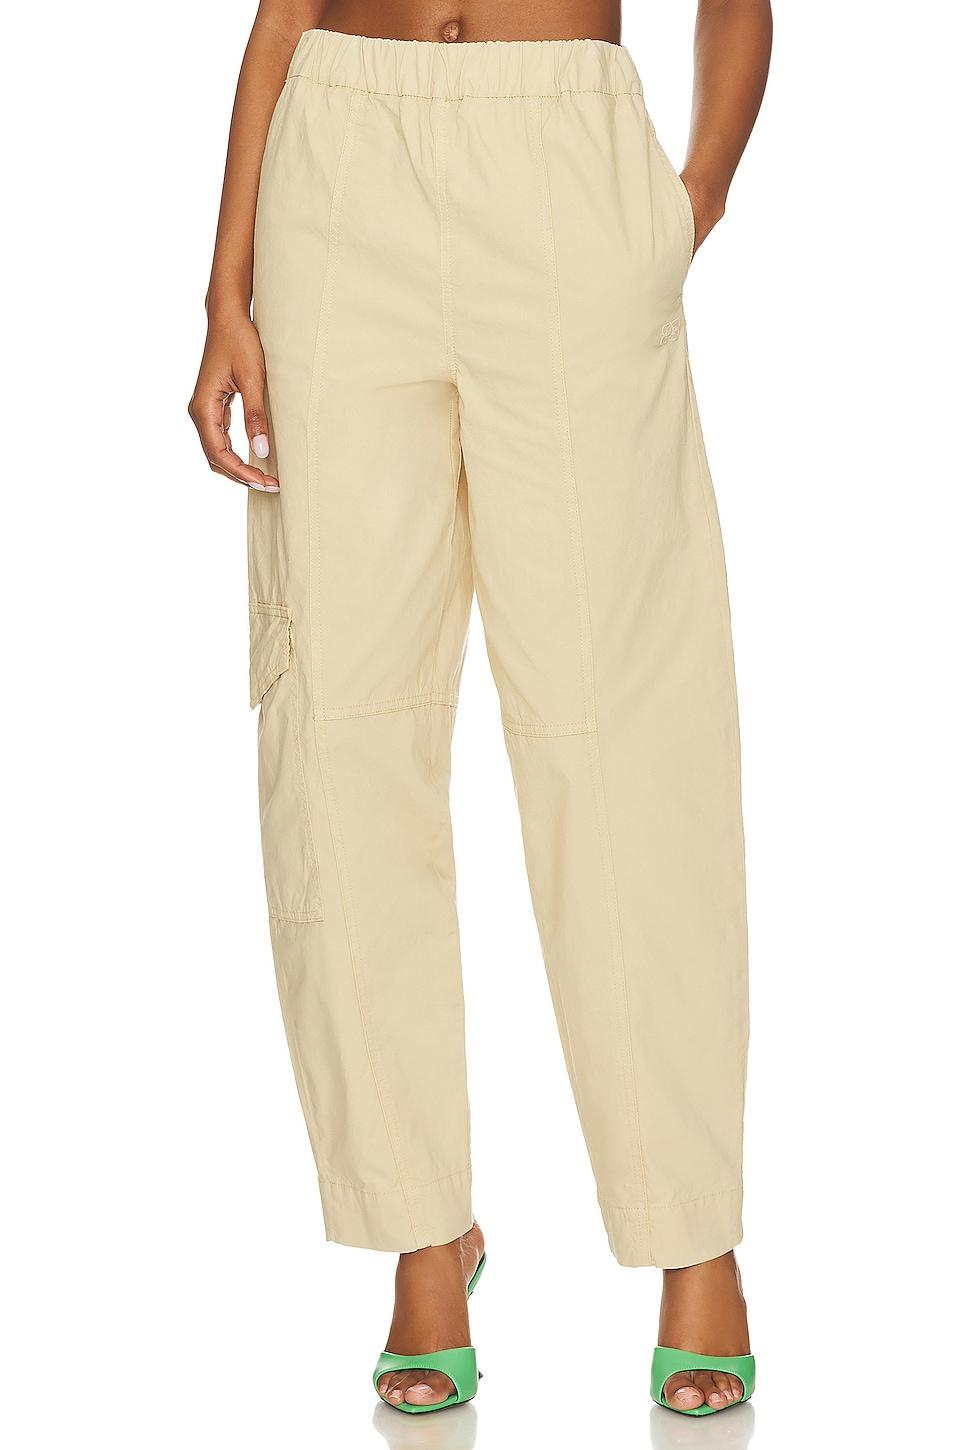 Ganni Elasticated Curve Pants in Natural | Lyst